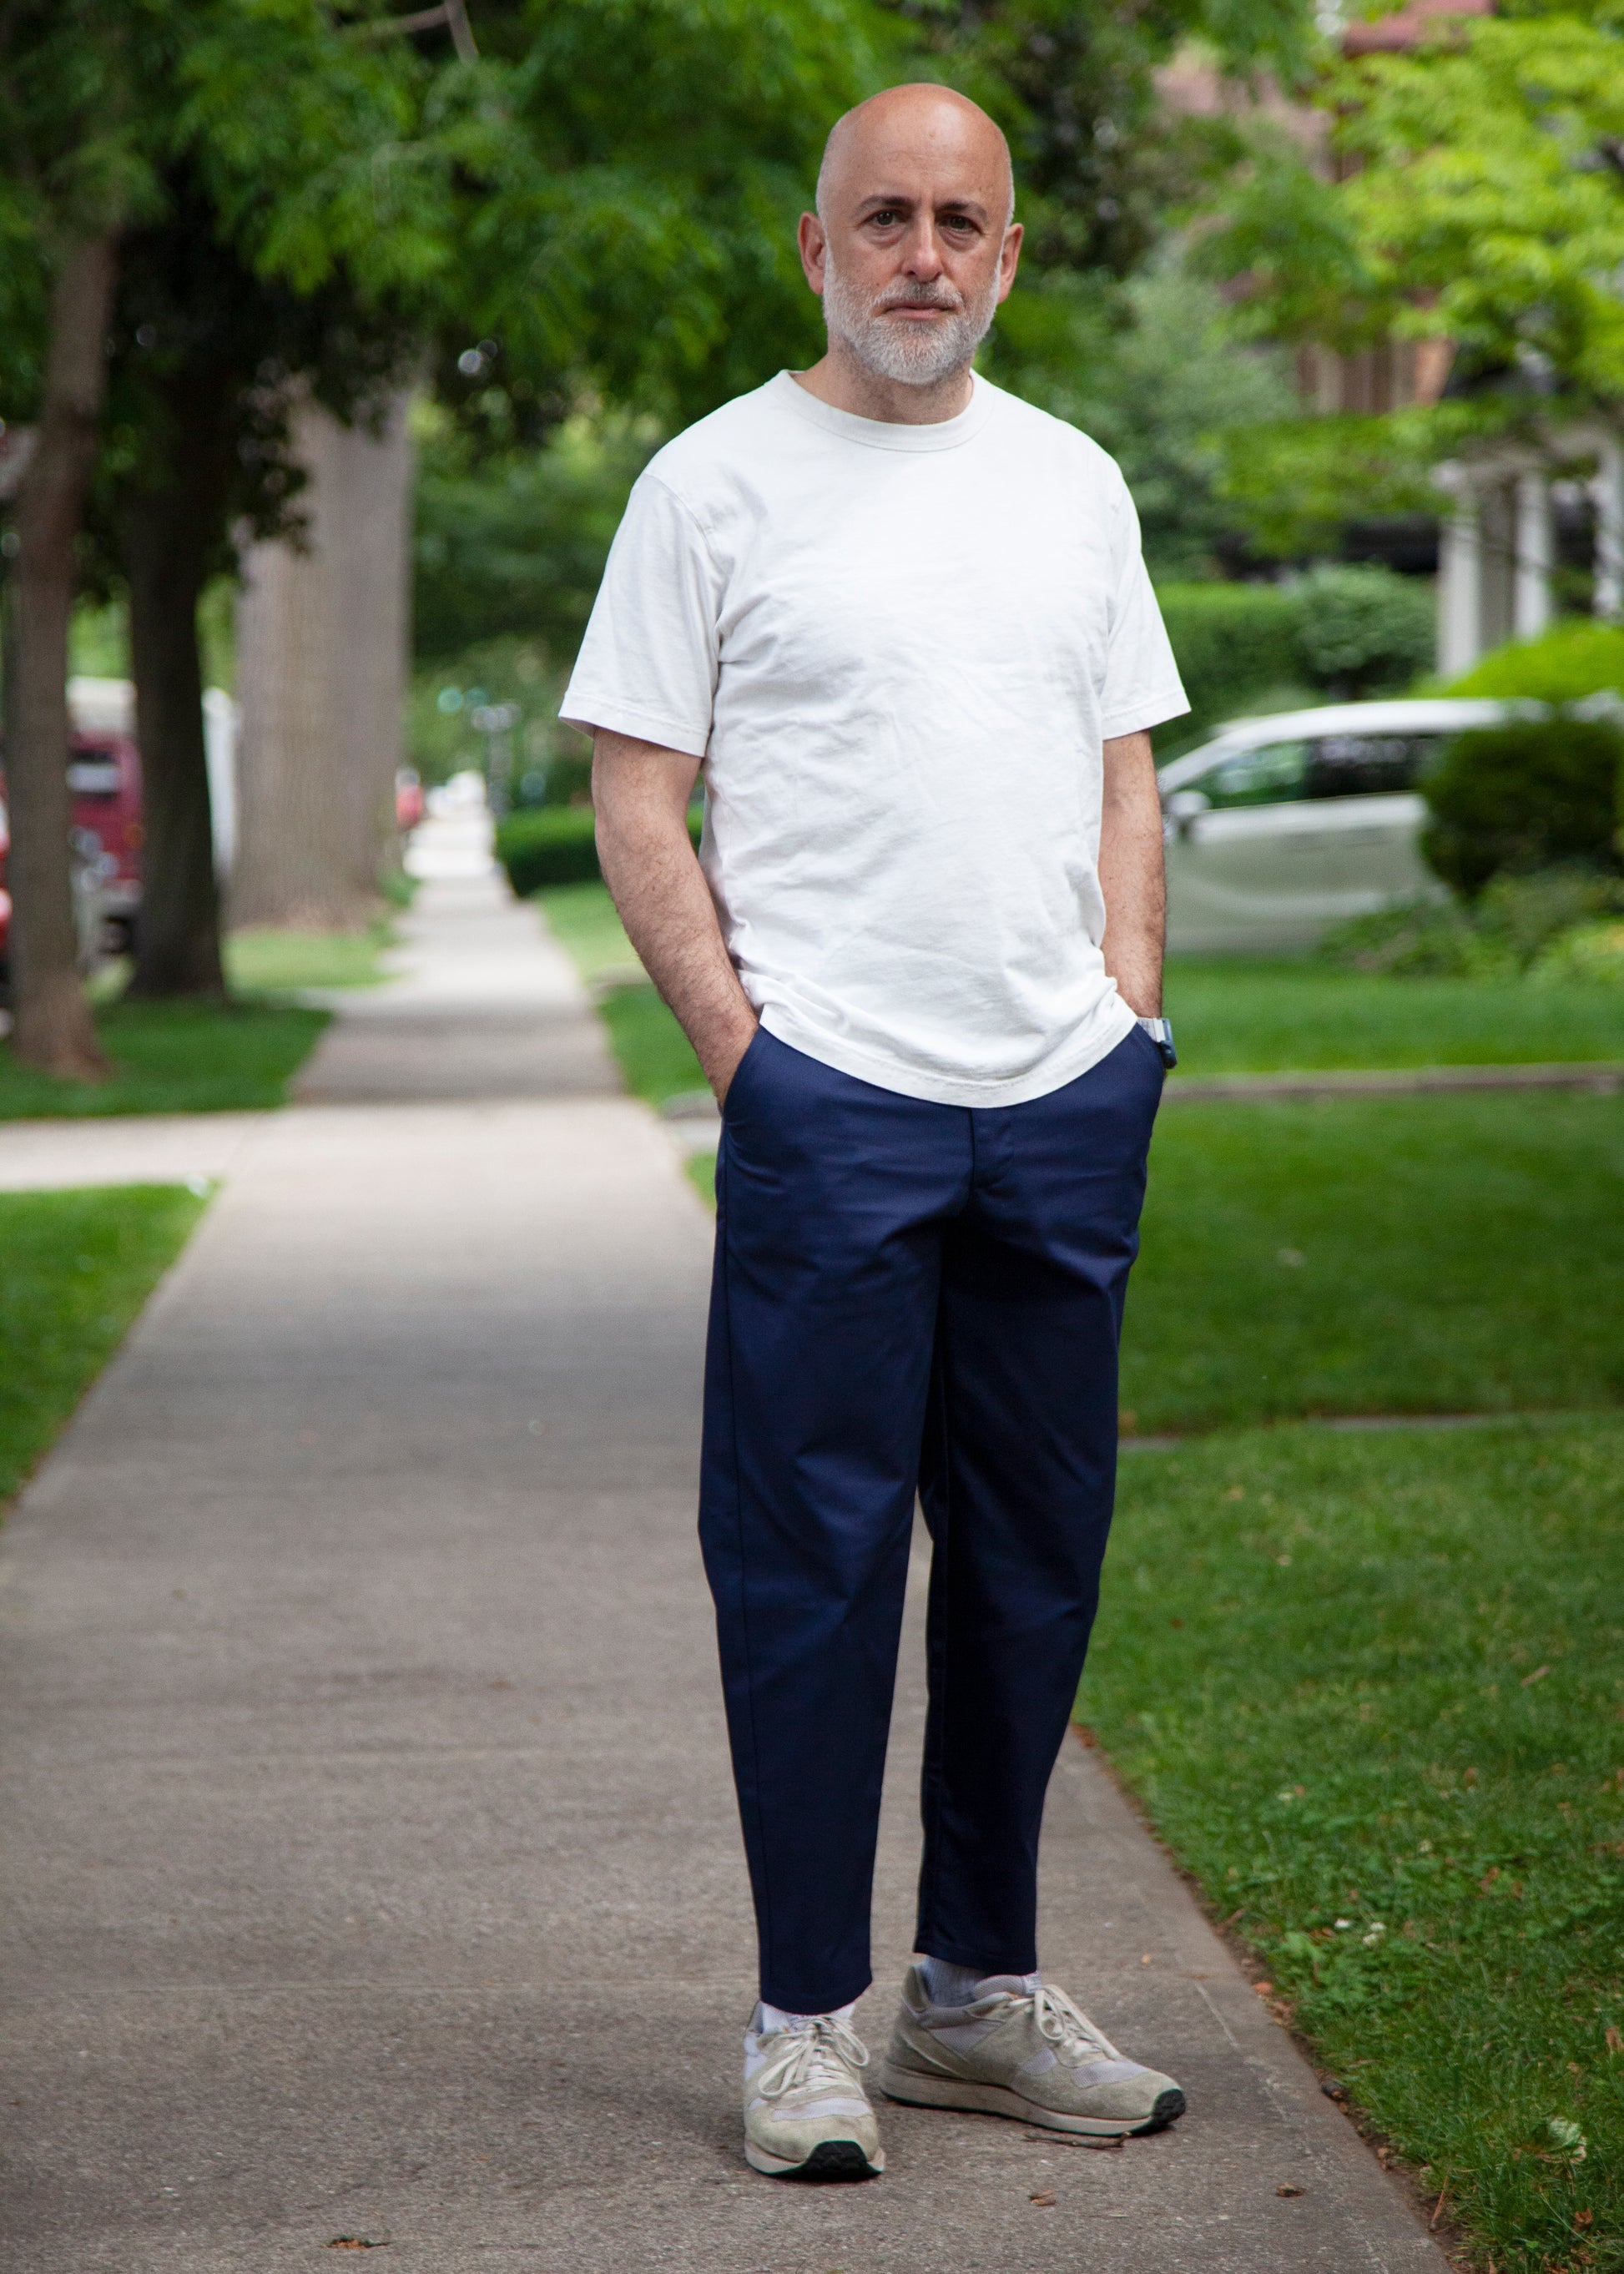 Model wearing white t-shirt, lightweight danver pants in color navy and white/grey sneakers. Outdoors 